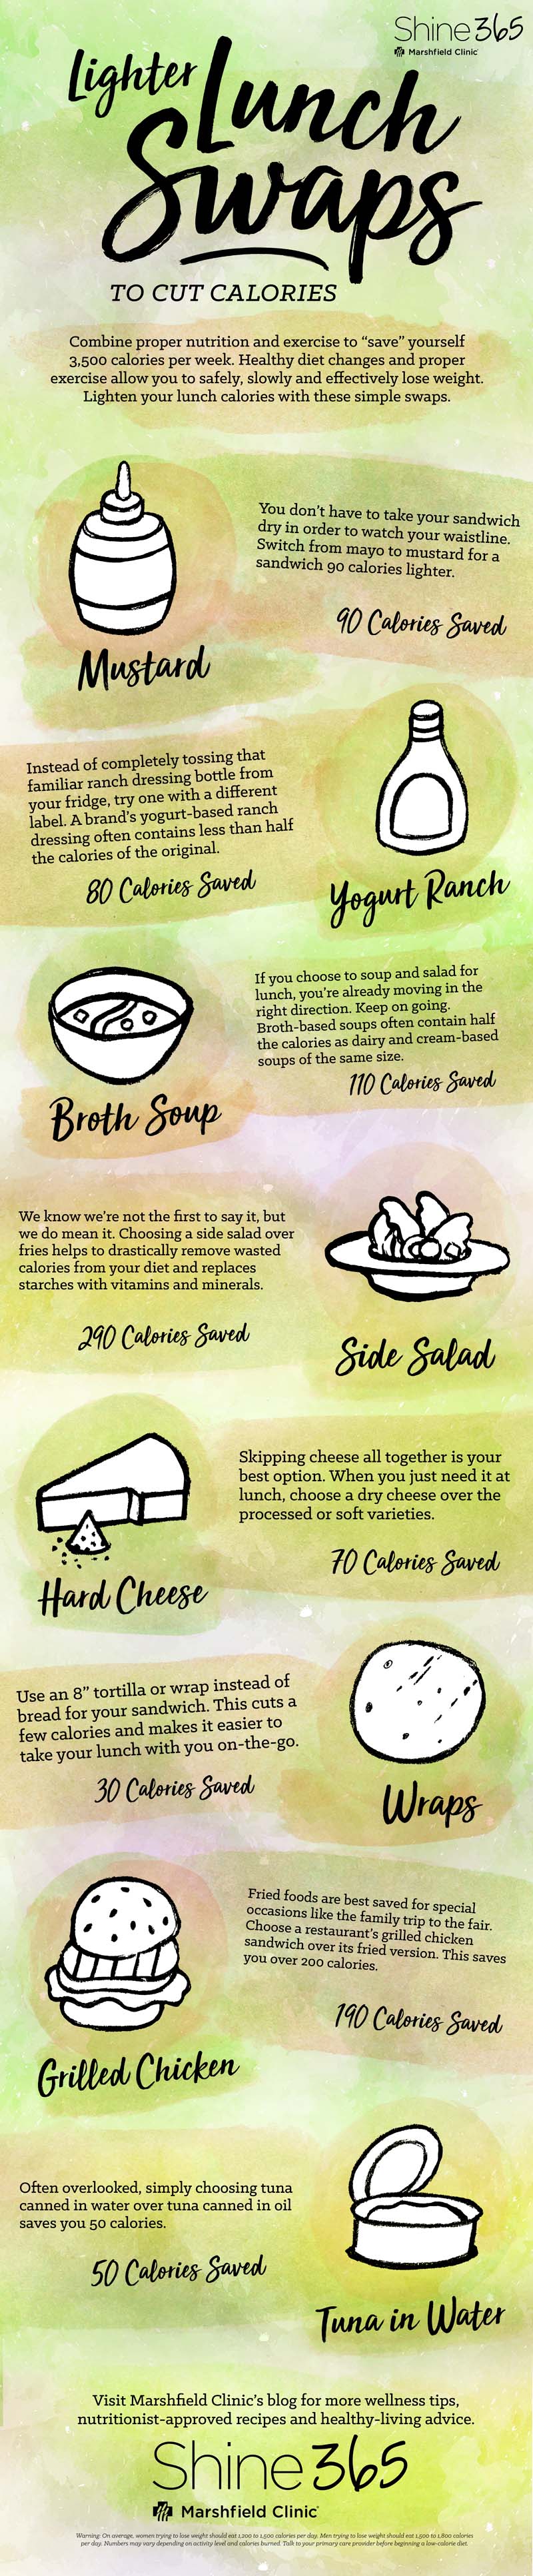 Lighter Lunch Swaps, Calorie-cutting infographic